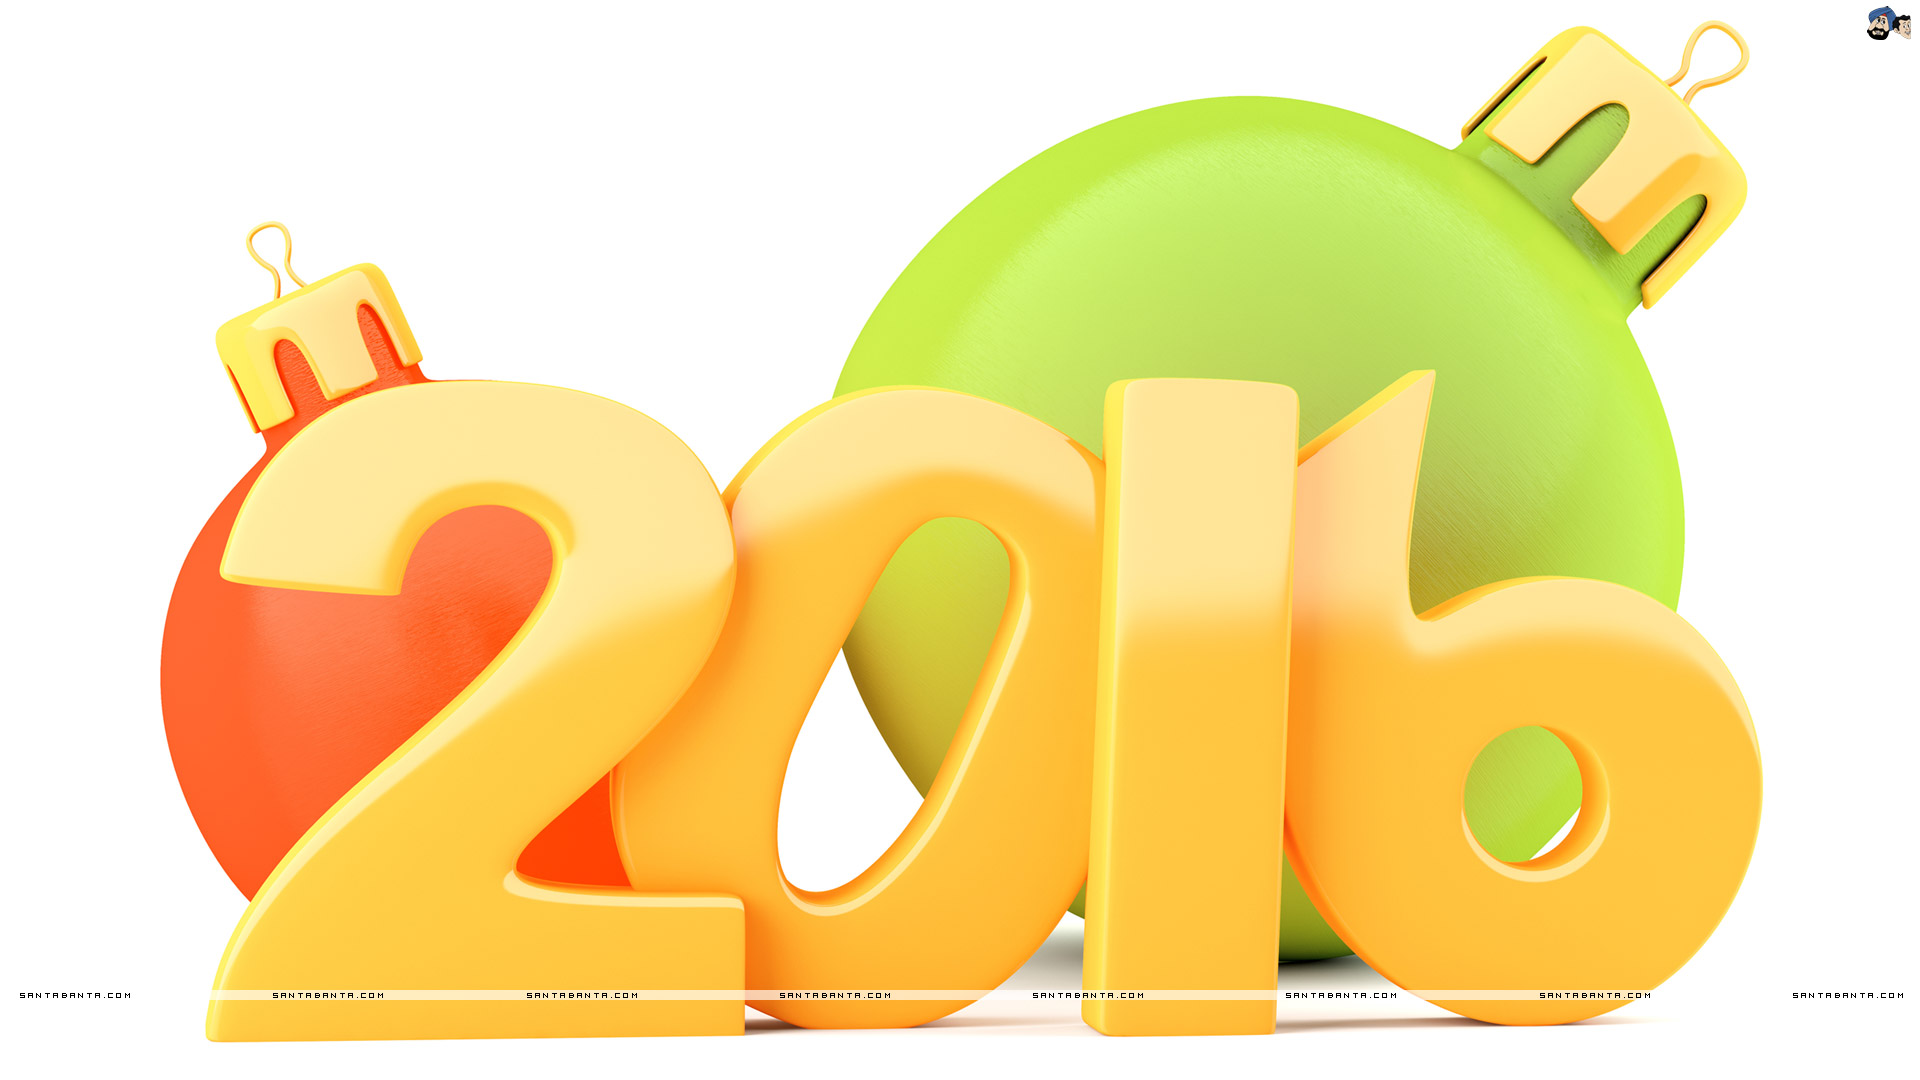 New Year 2016 Wallpaper & HD Background Images Free Download